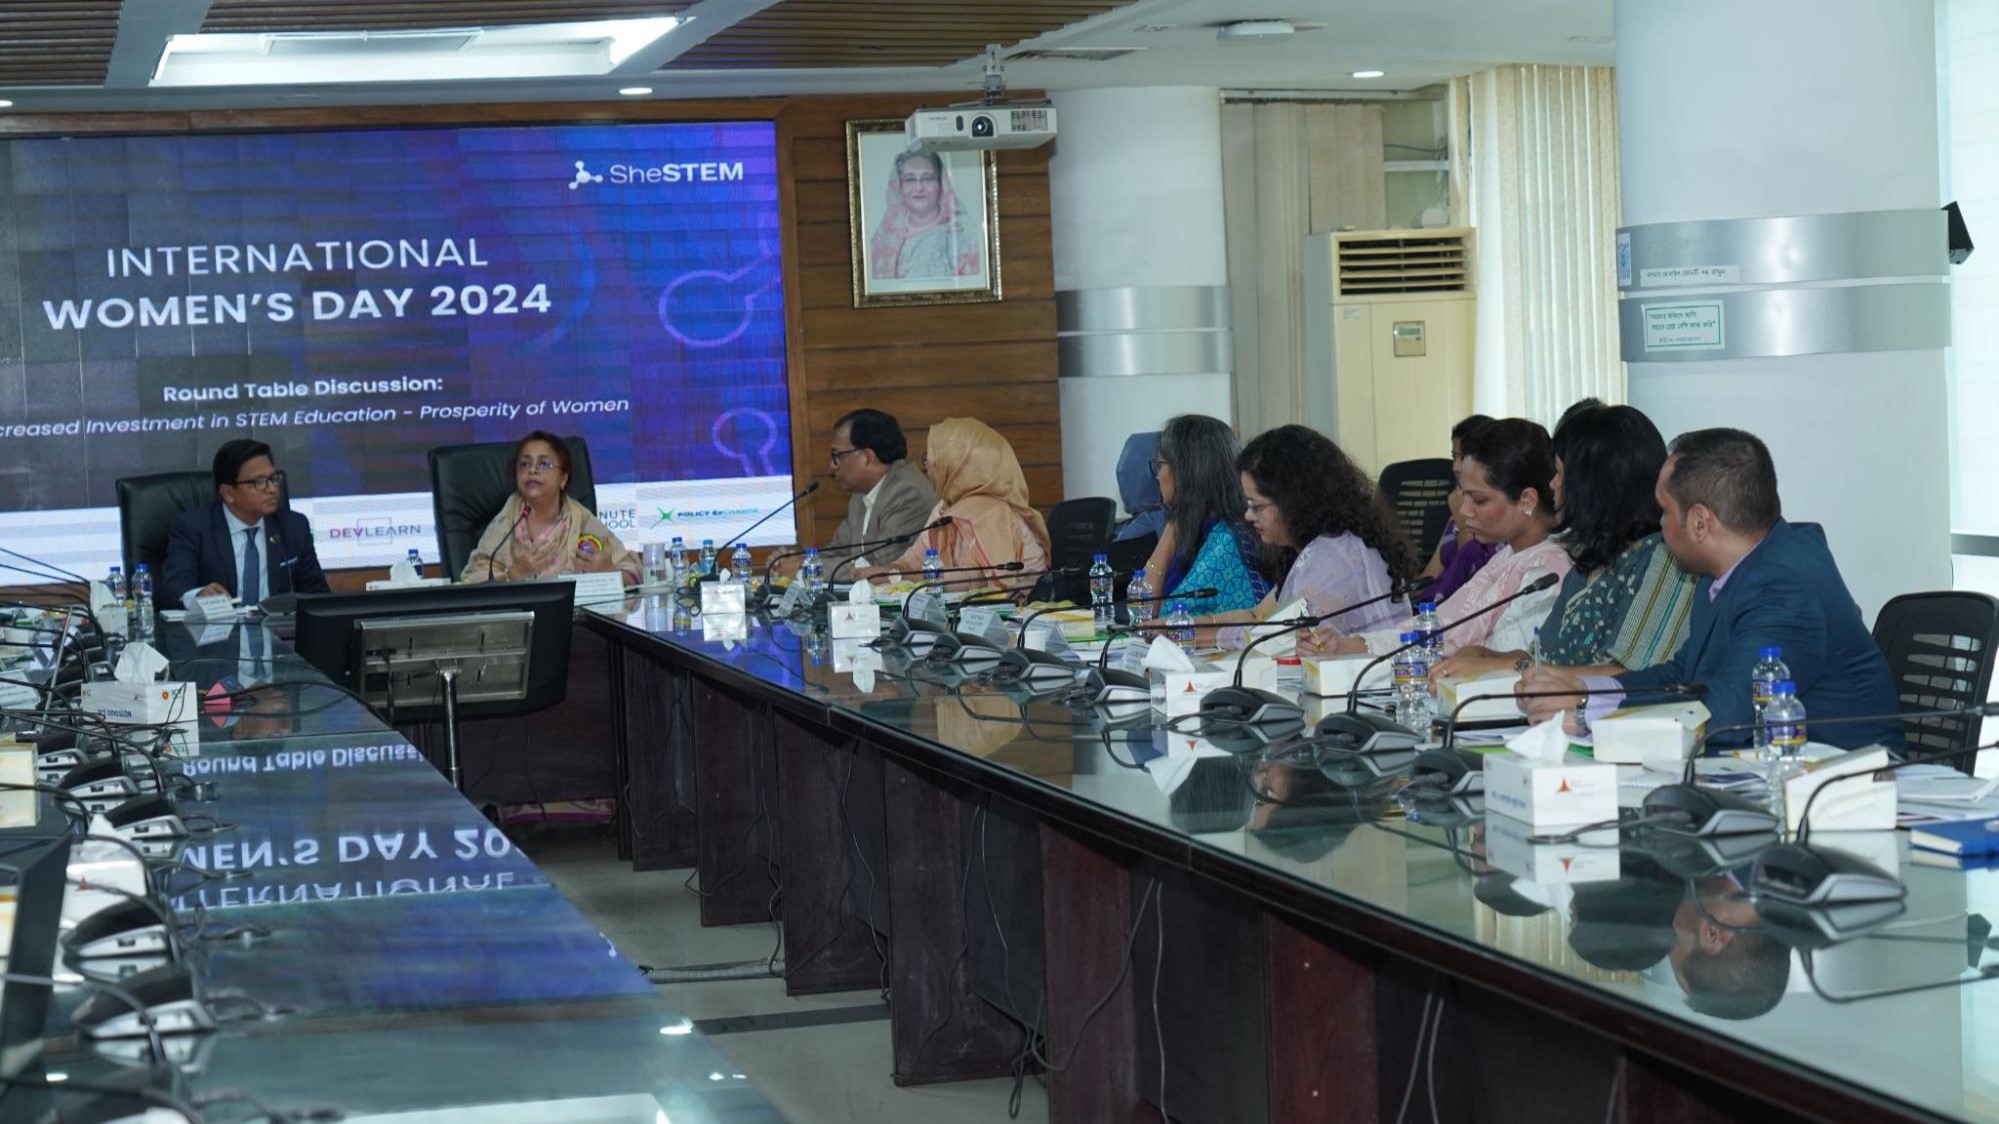 International Women’s Day 2024 Roundtable Discussion: Increased Investment in STEM Education – Prosperity of Women